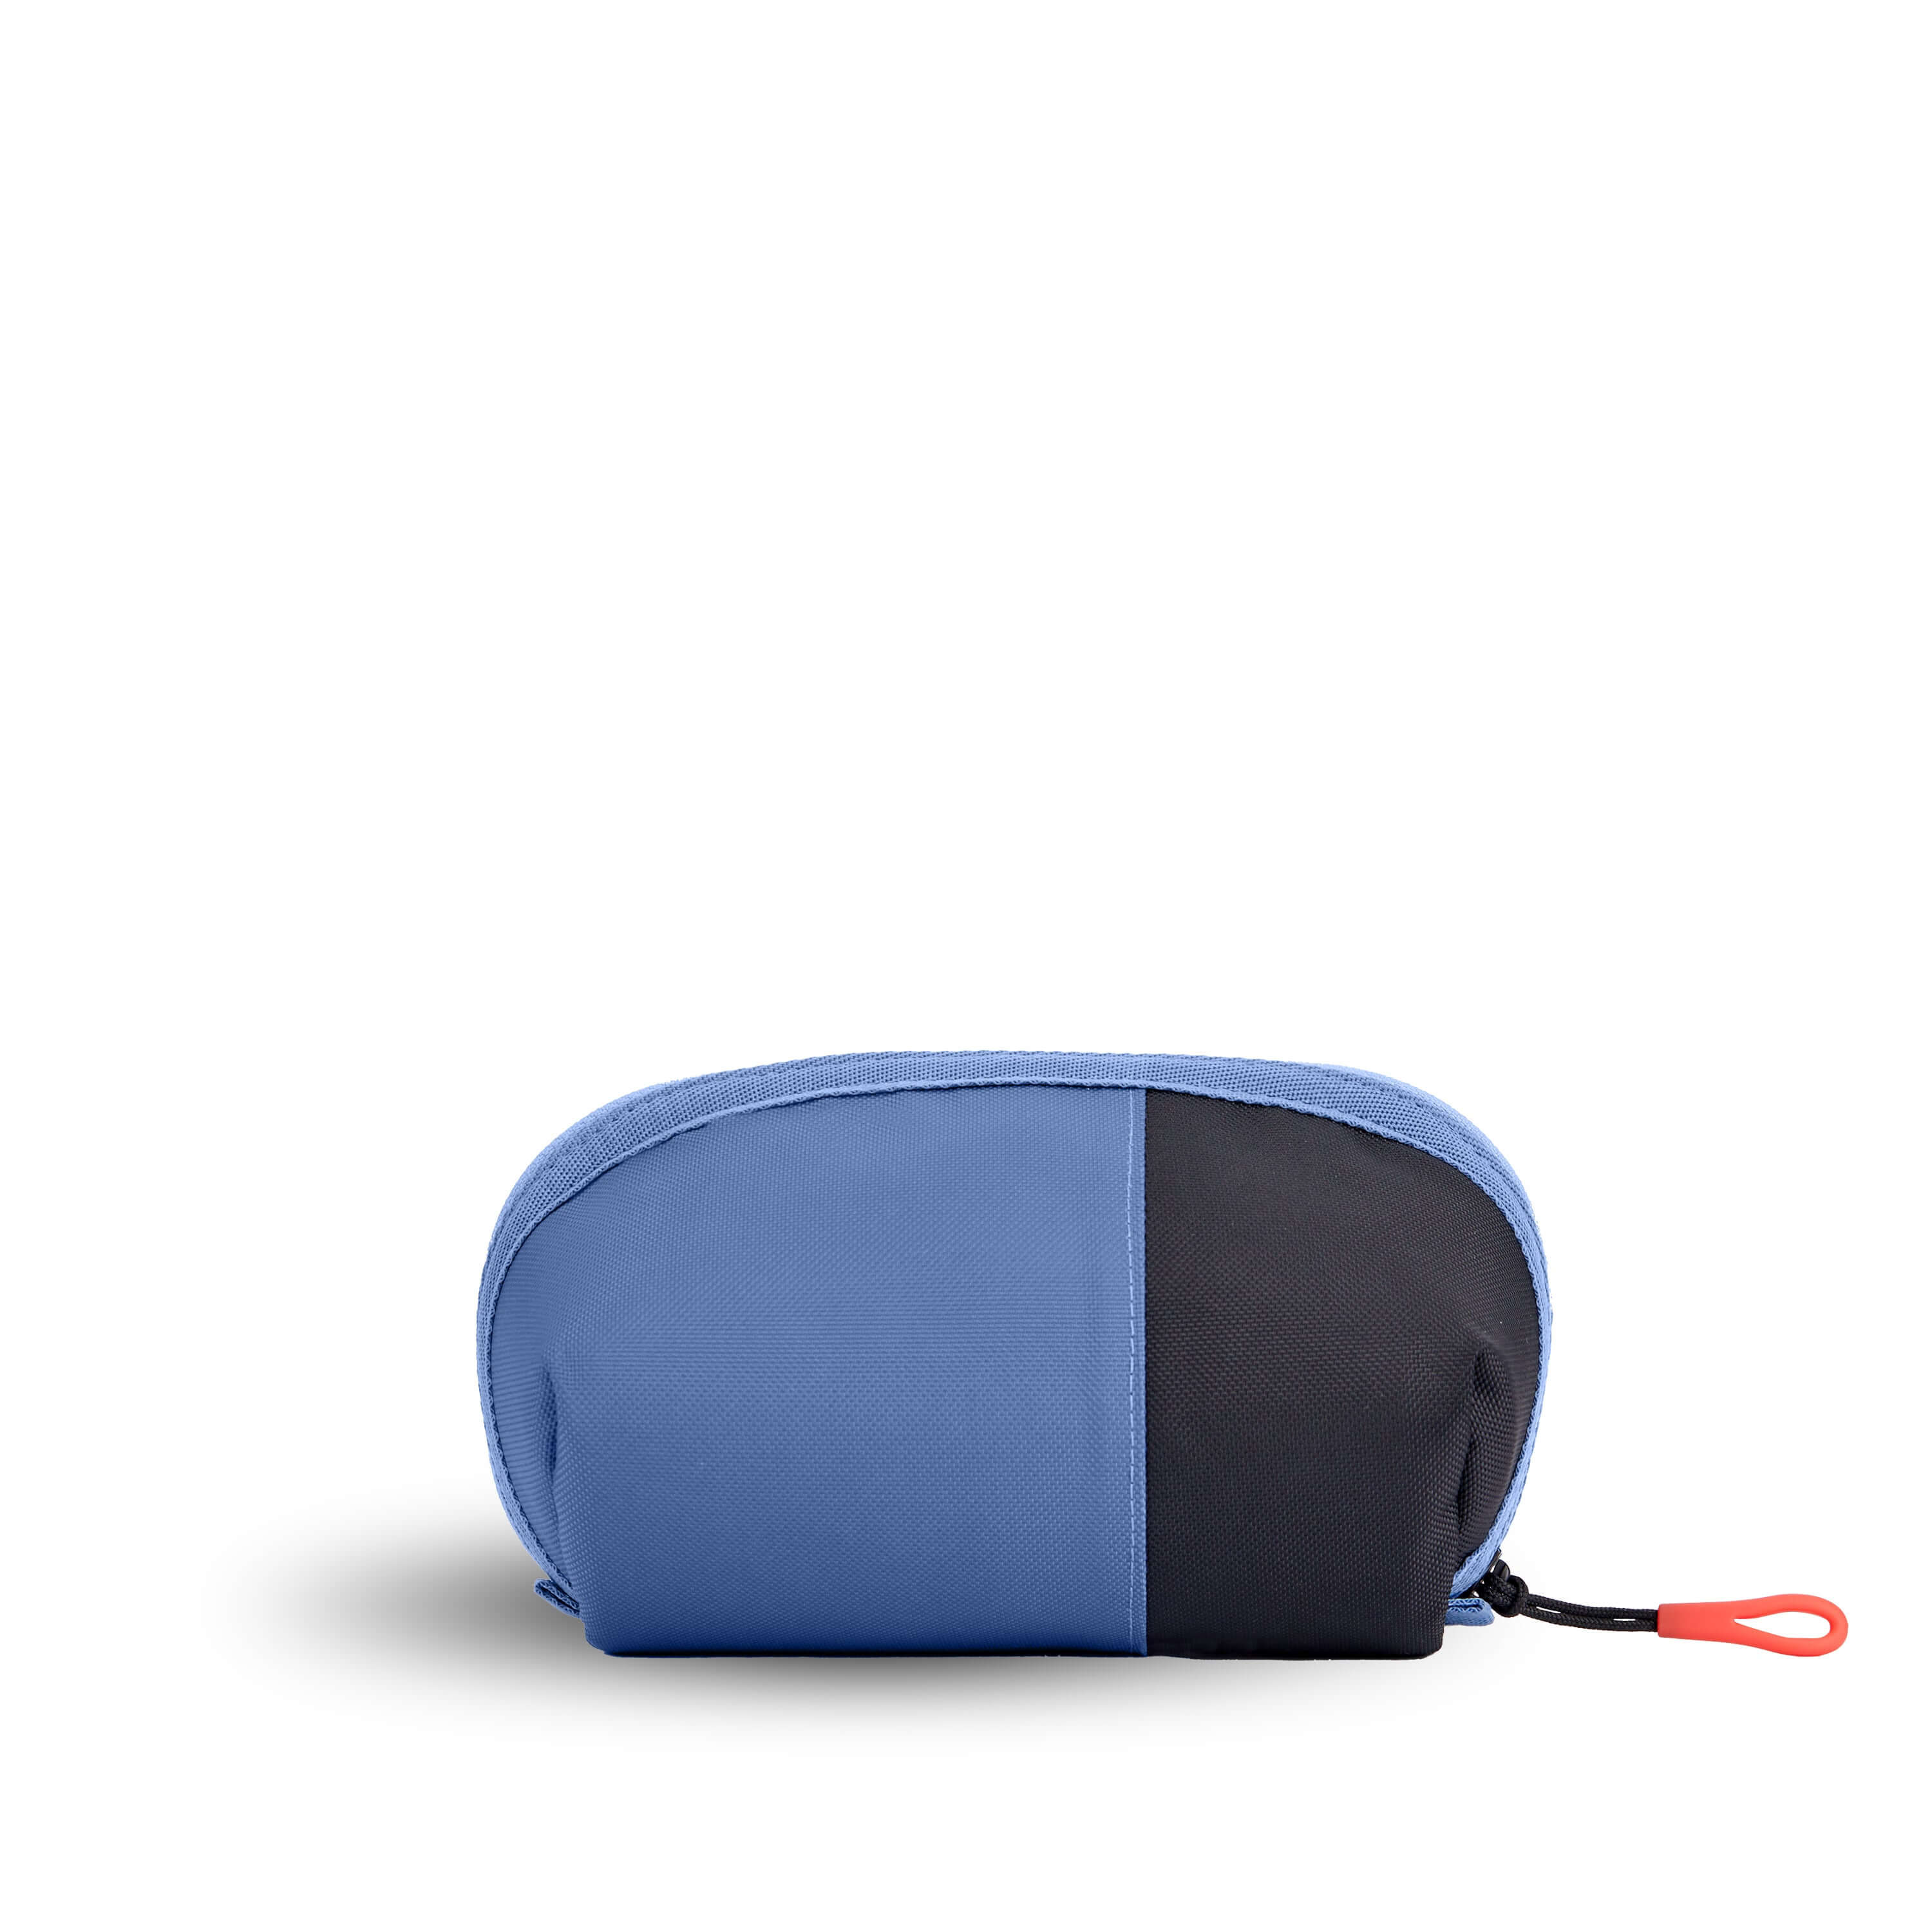 Back view of Sherpani travel accessory the Harmony in Pacific Blue. The pouch is two-toned in ocean blue and black.